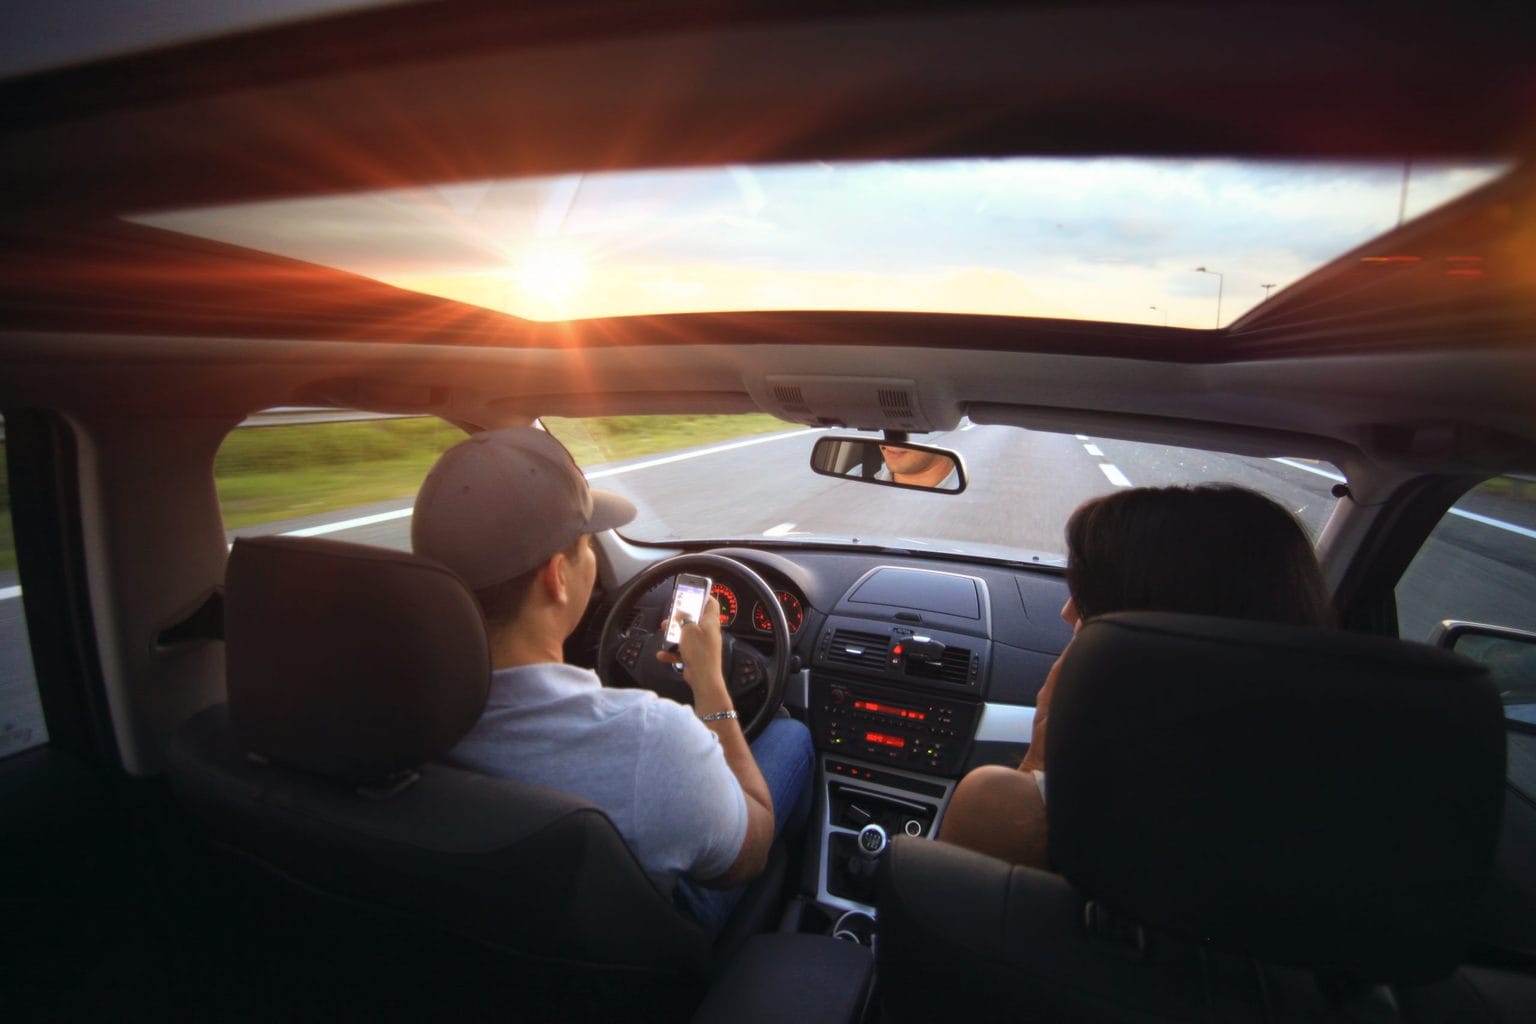 man and woman driving on road 
source: SplitShire from Pexels